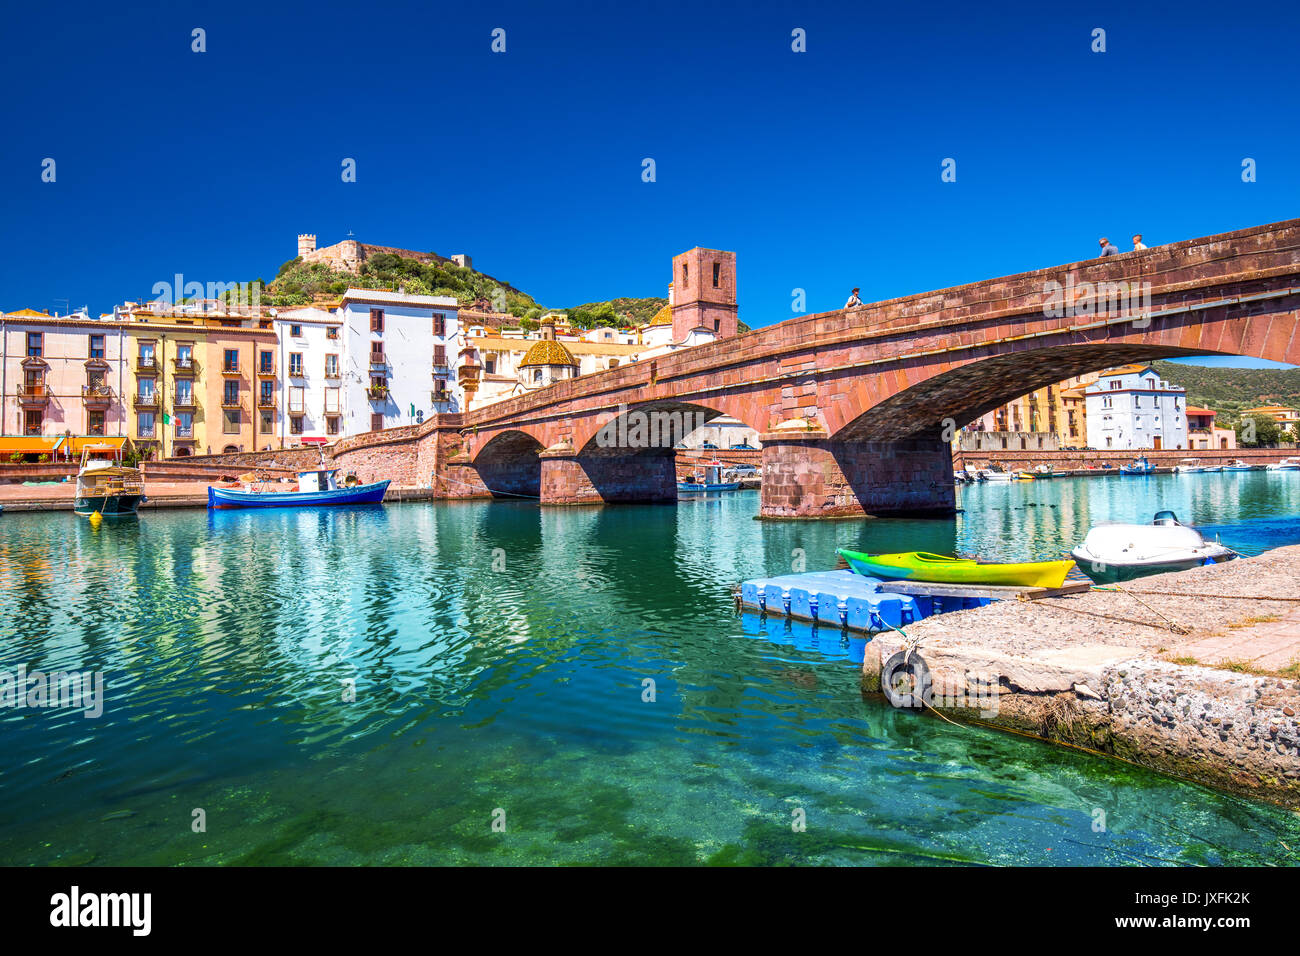 Bosa old city center with colorful houses and Fiume Temo river, Sardinia, Italy, Europe. Stock Photo